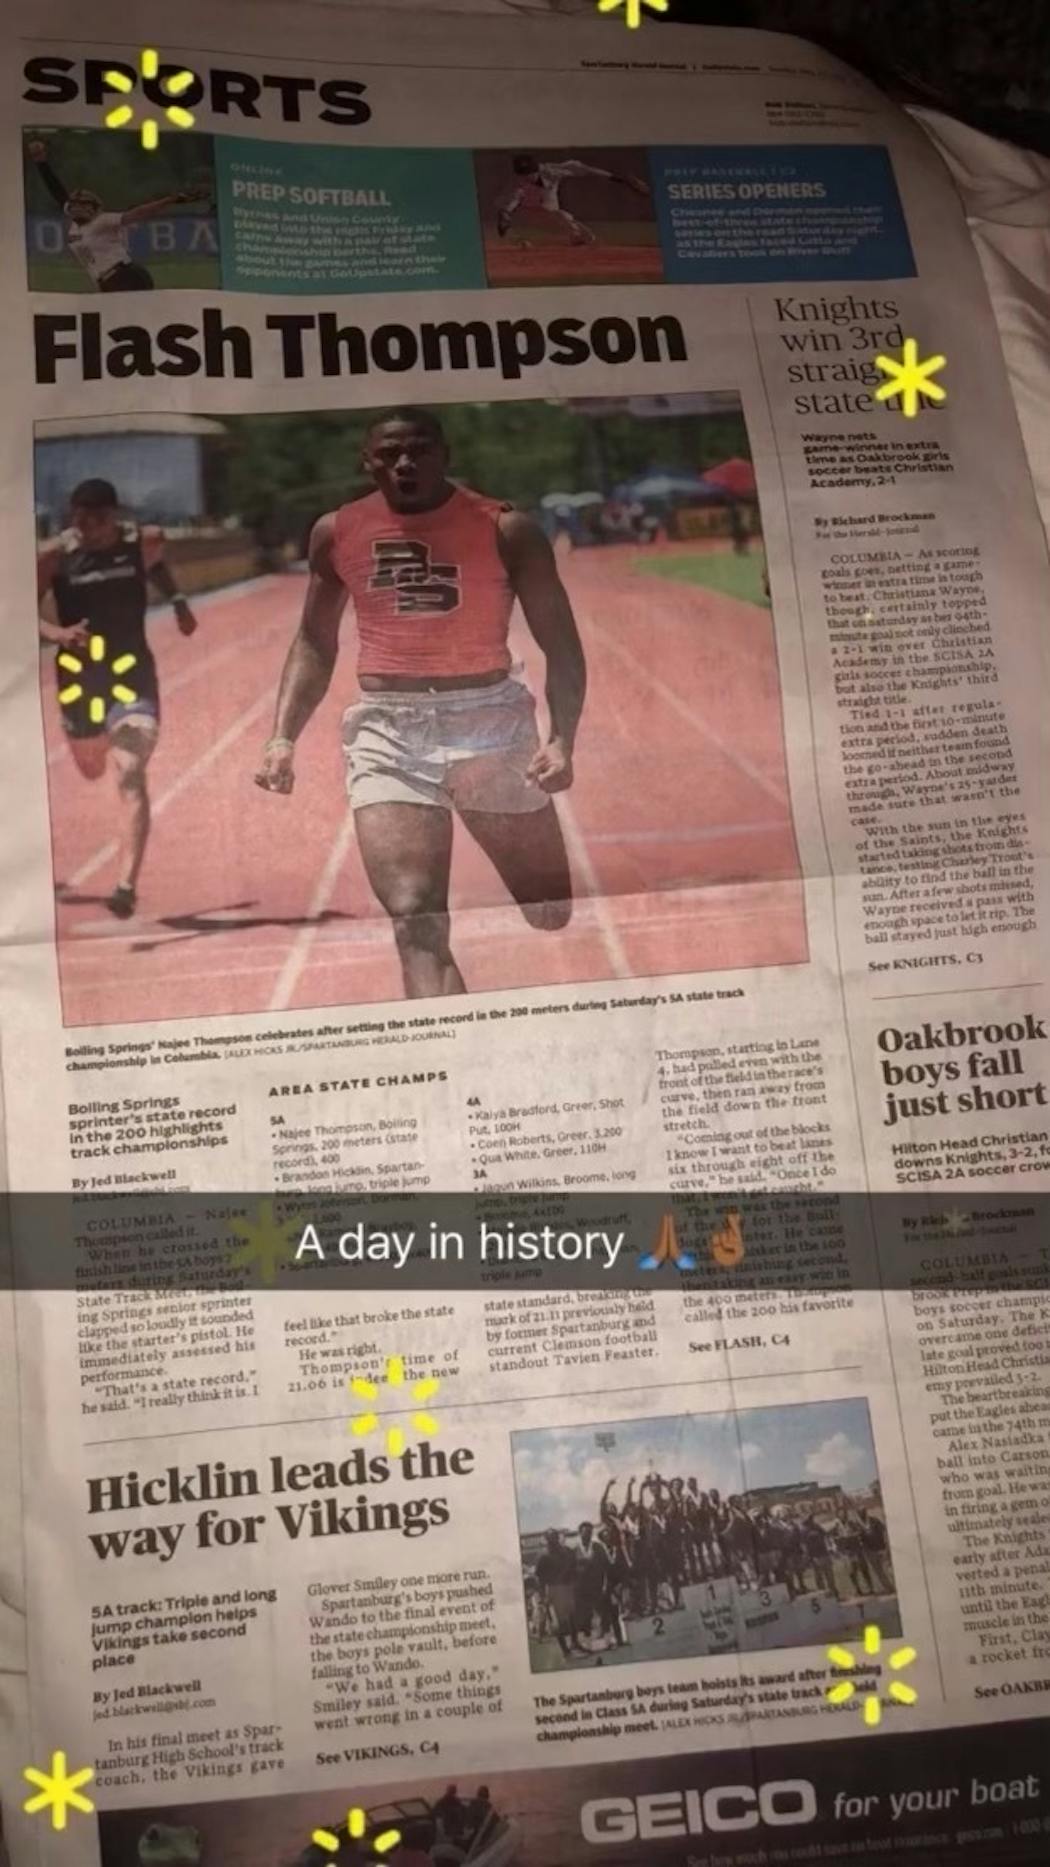 Vikings rookie NaJee Thompson still has a photo of the Spartanburg Herald Journal sports page from when he set a South Carolina record winning the 200-meter championship in 2018.